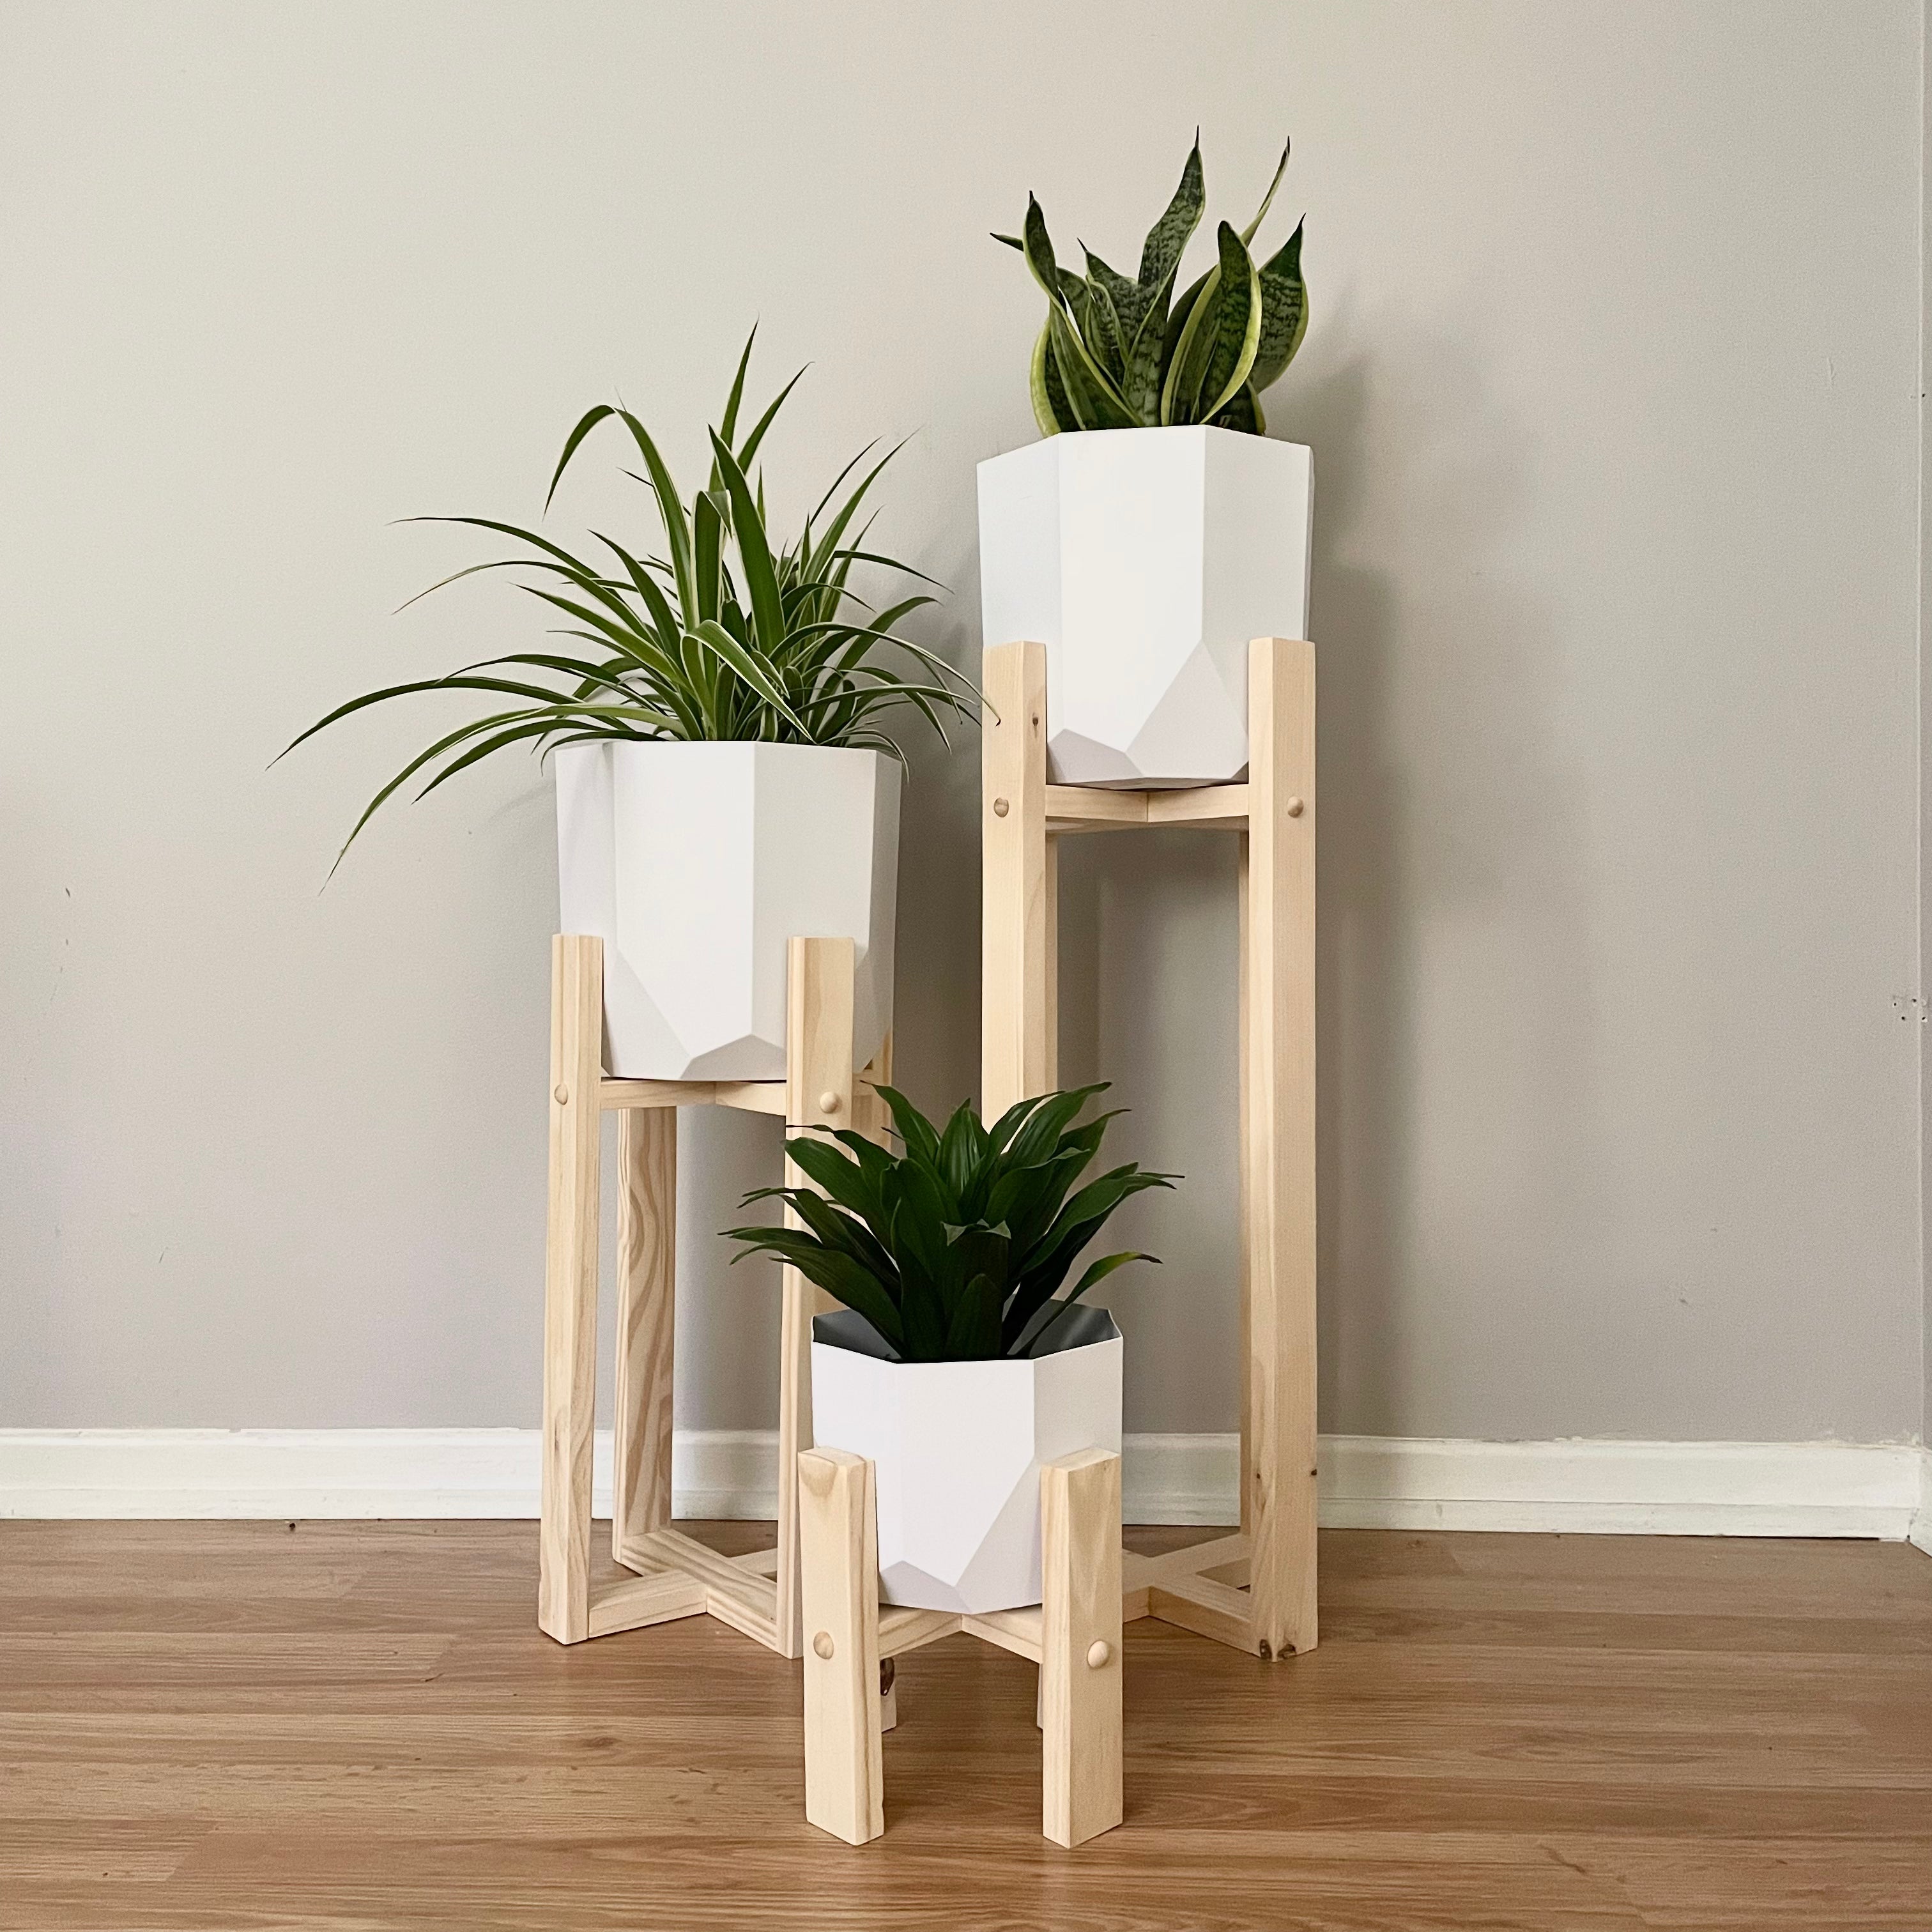 MIX & MATCH: Natural Pine Plant Stands Project Pine Designs SM + MED + LG Plant Stand + 3 Plant Pots 